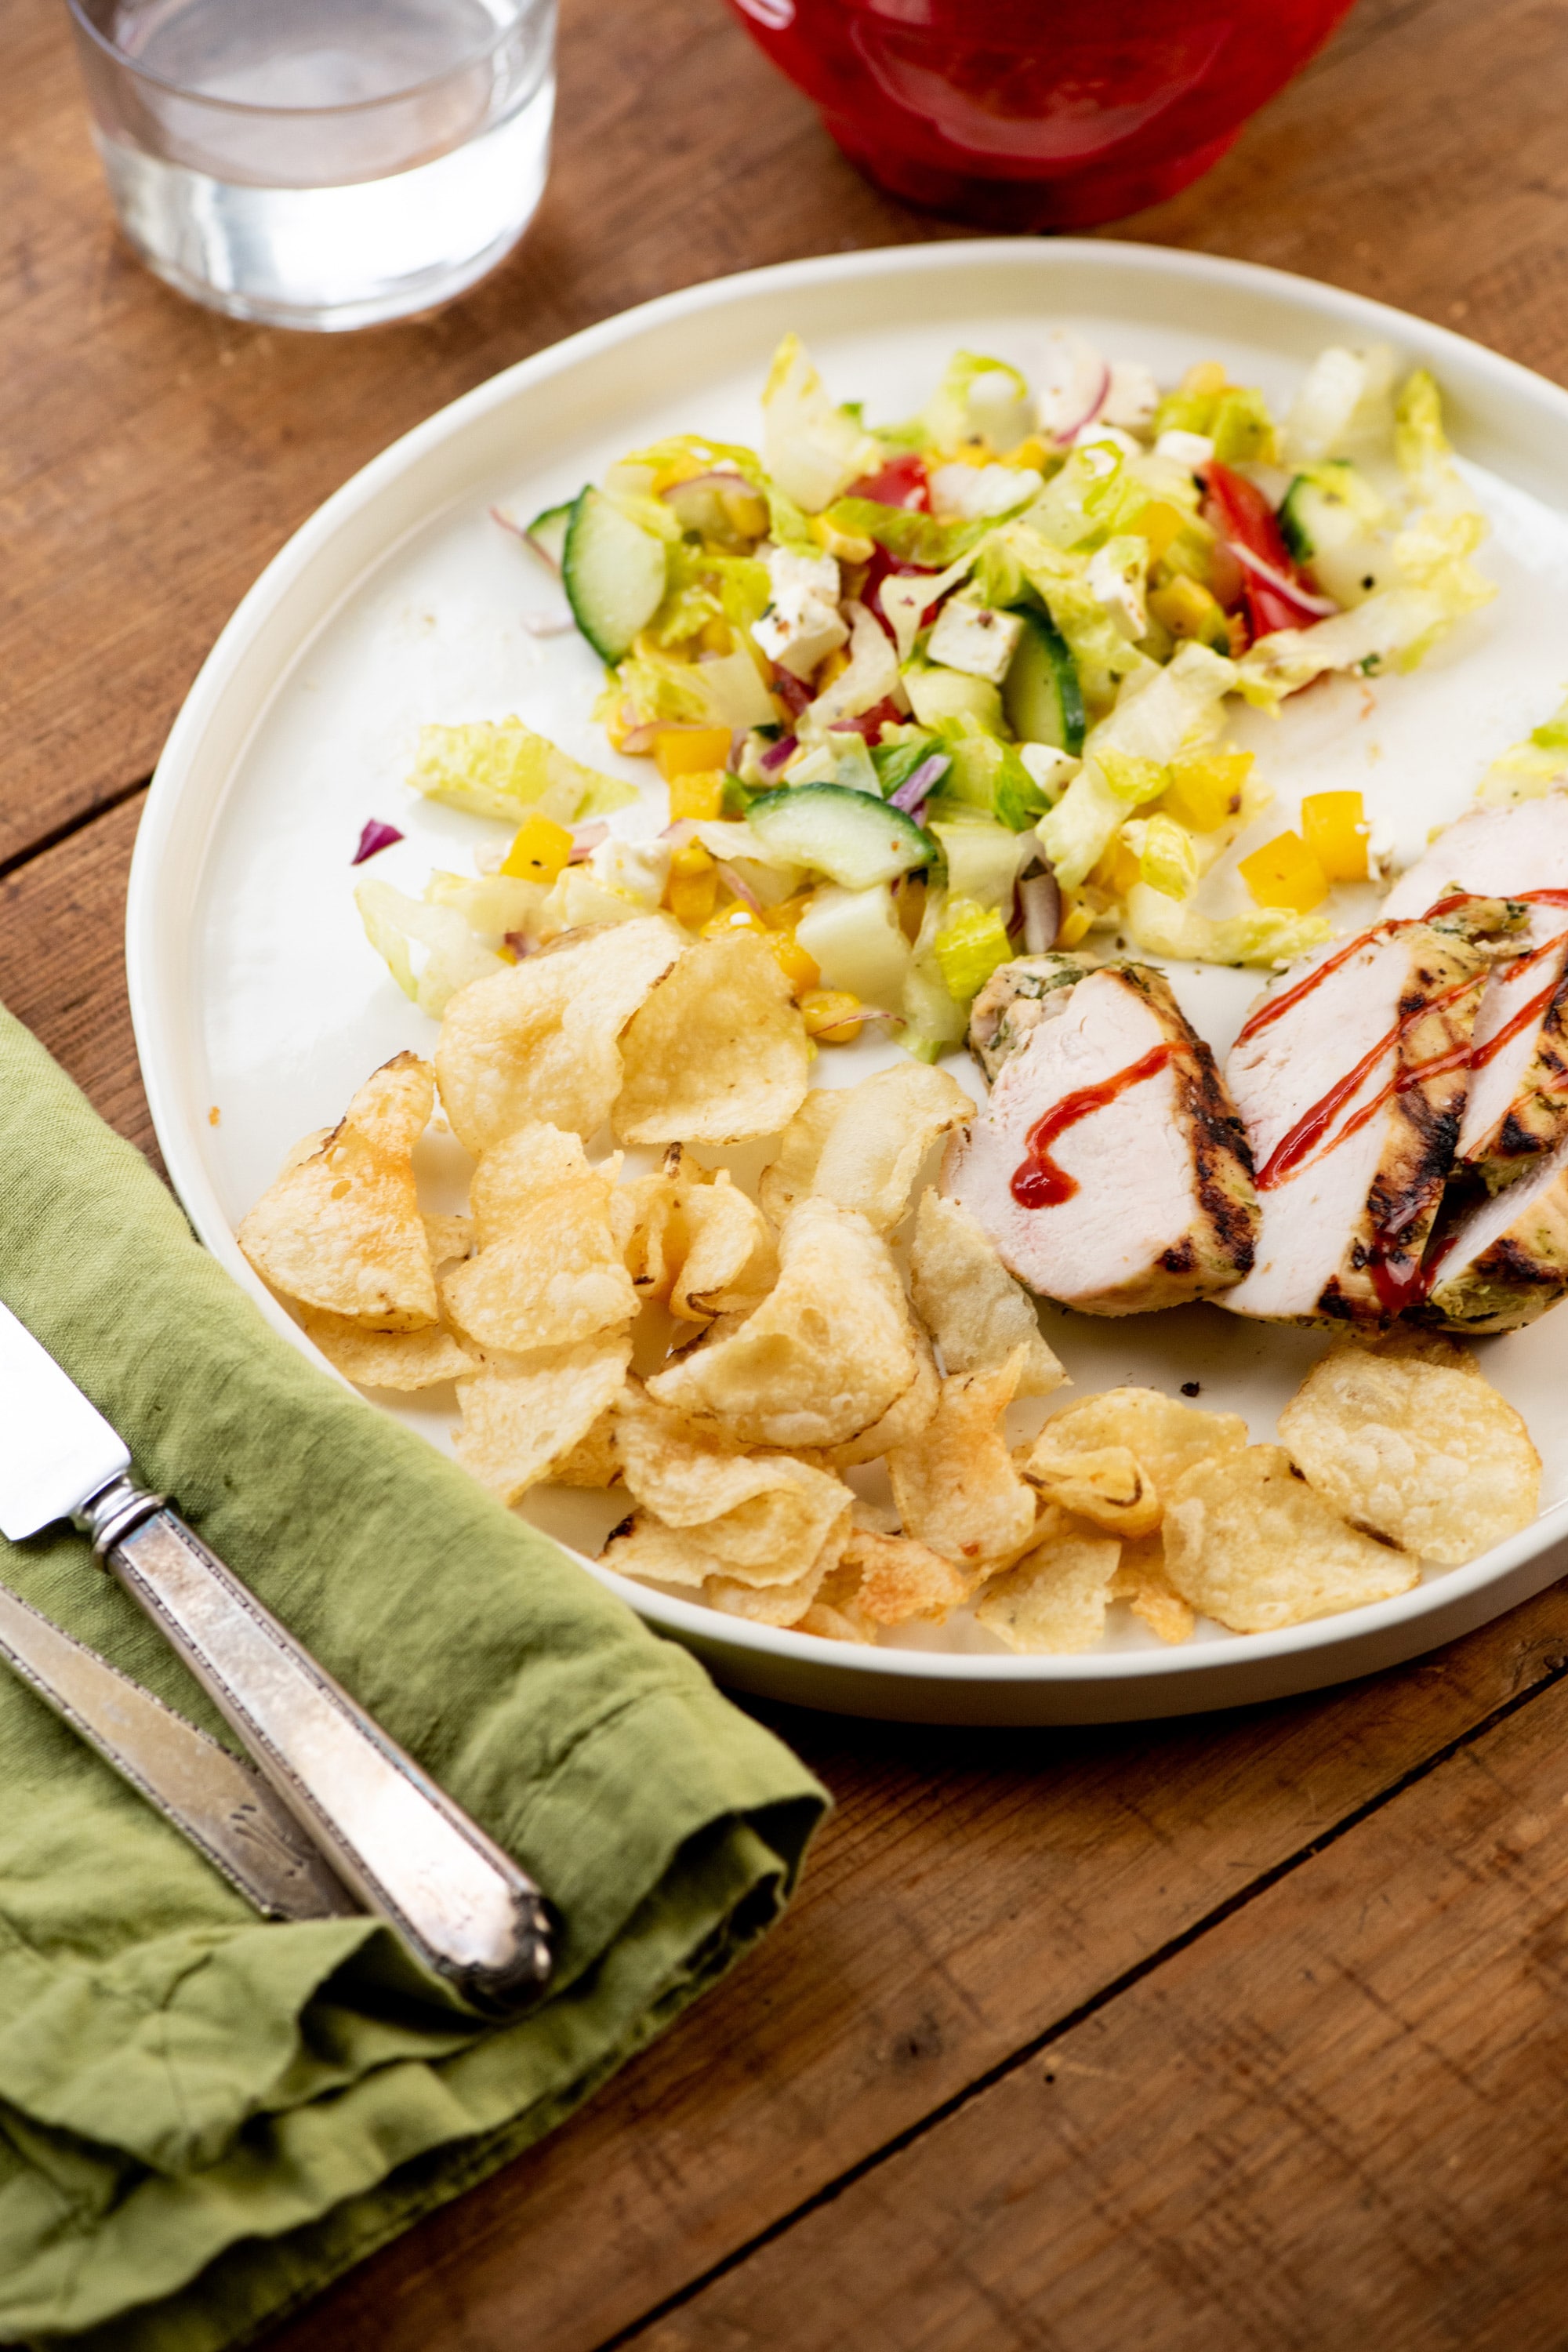 Plate with chips, salad, and Grilled Chicken Breasts with Lime, Roasted Garlic and Fresh Herb Marinade.